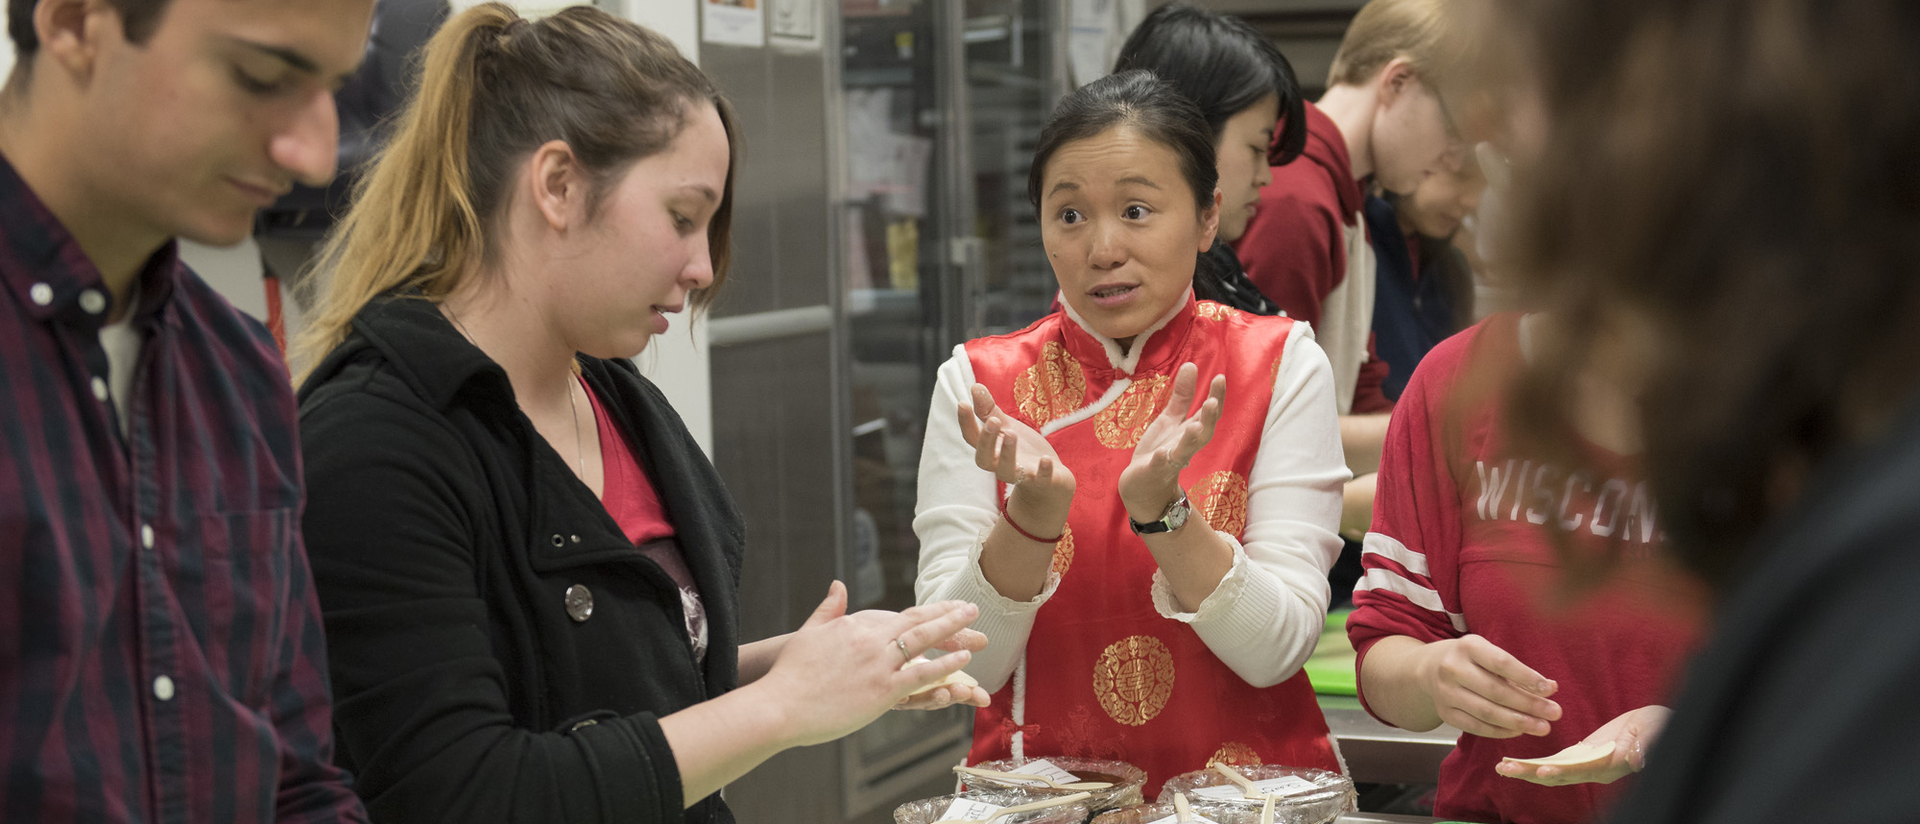 Chinese language students make dumplings to celebrate the Chinese New Year.